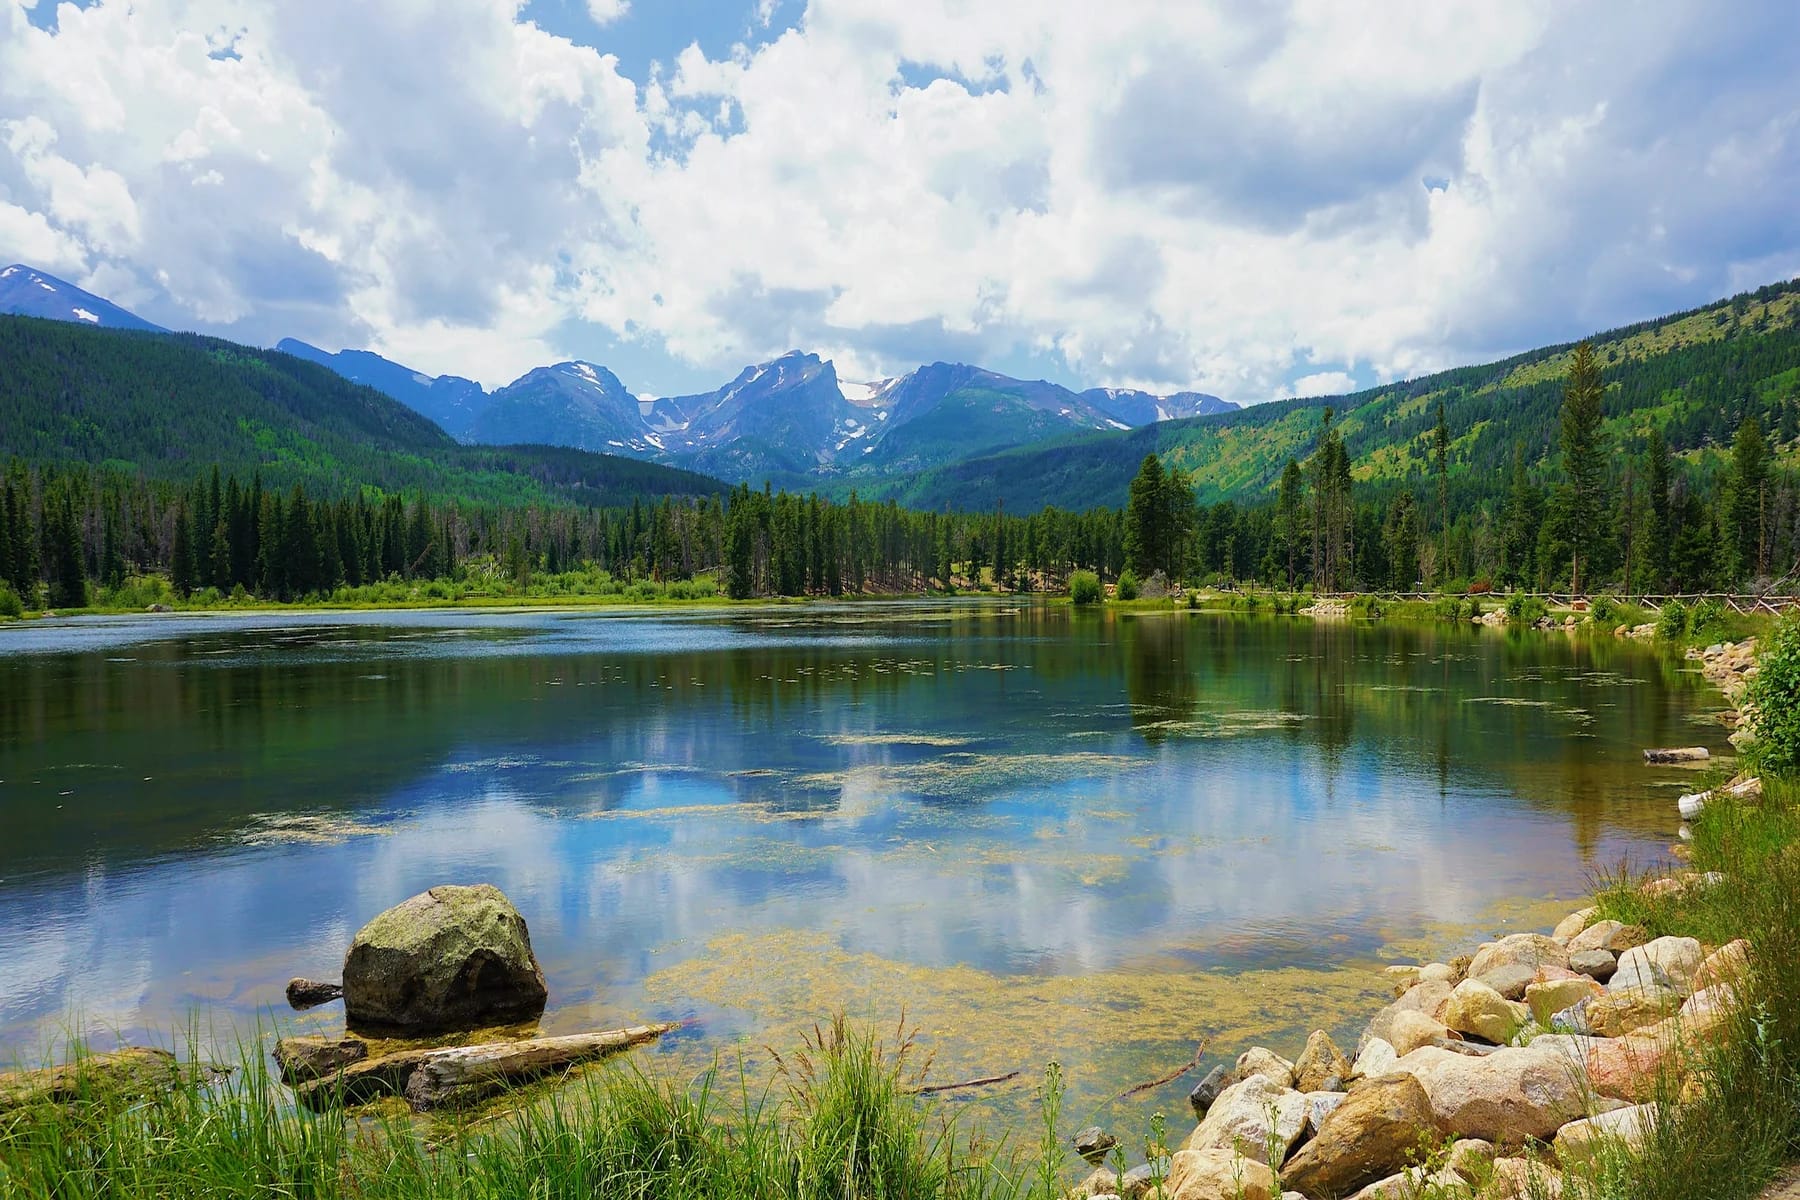 Image of rocky mountain national park - book outdoors